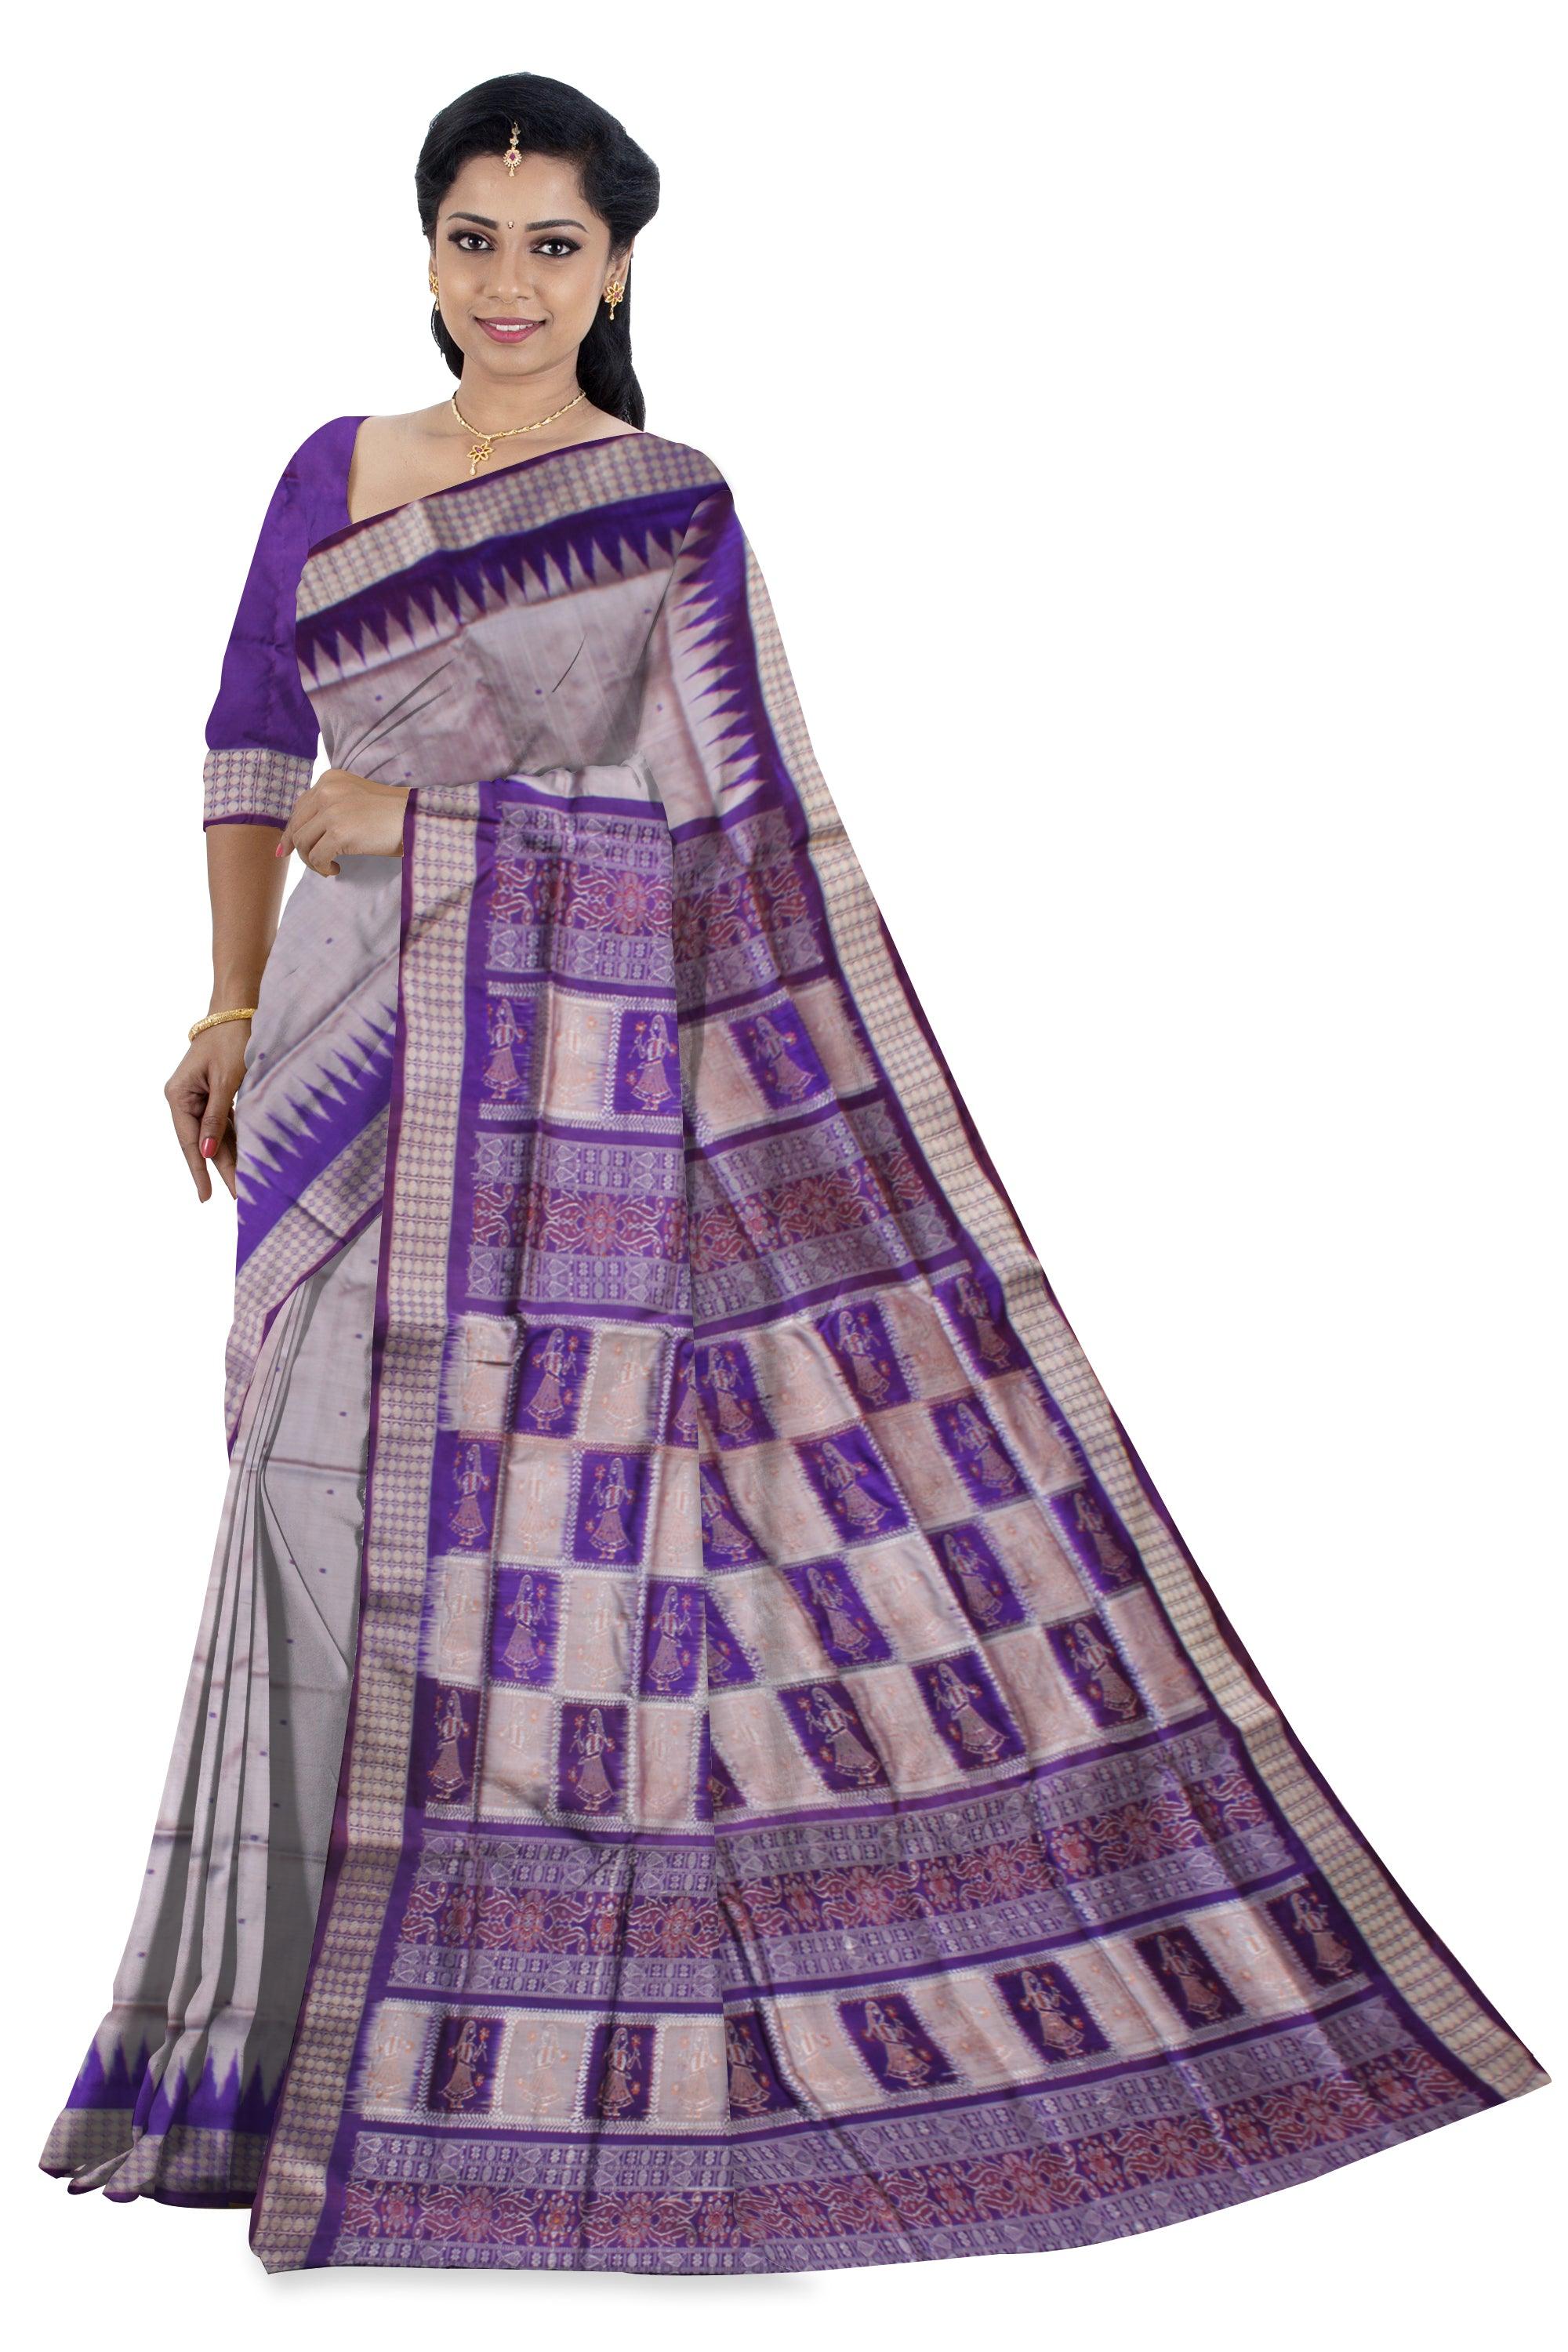 DOUBLE COLOR COMBINATION PALLU DOLL PRINT PATA SAREE IS SILVER AND PURPLE COLOR BASE, COMES WITH MATCHING BLOUSE PIECE. - Koshali Arts & Crafts Enterprise